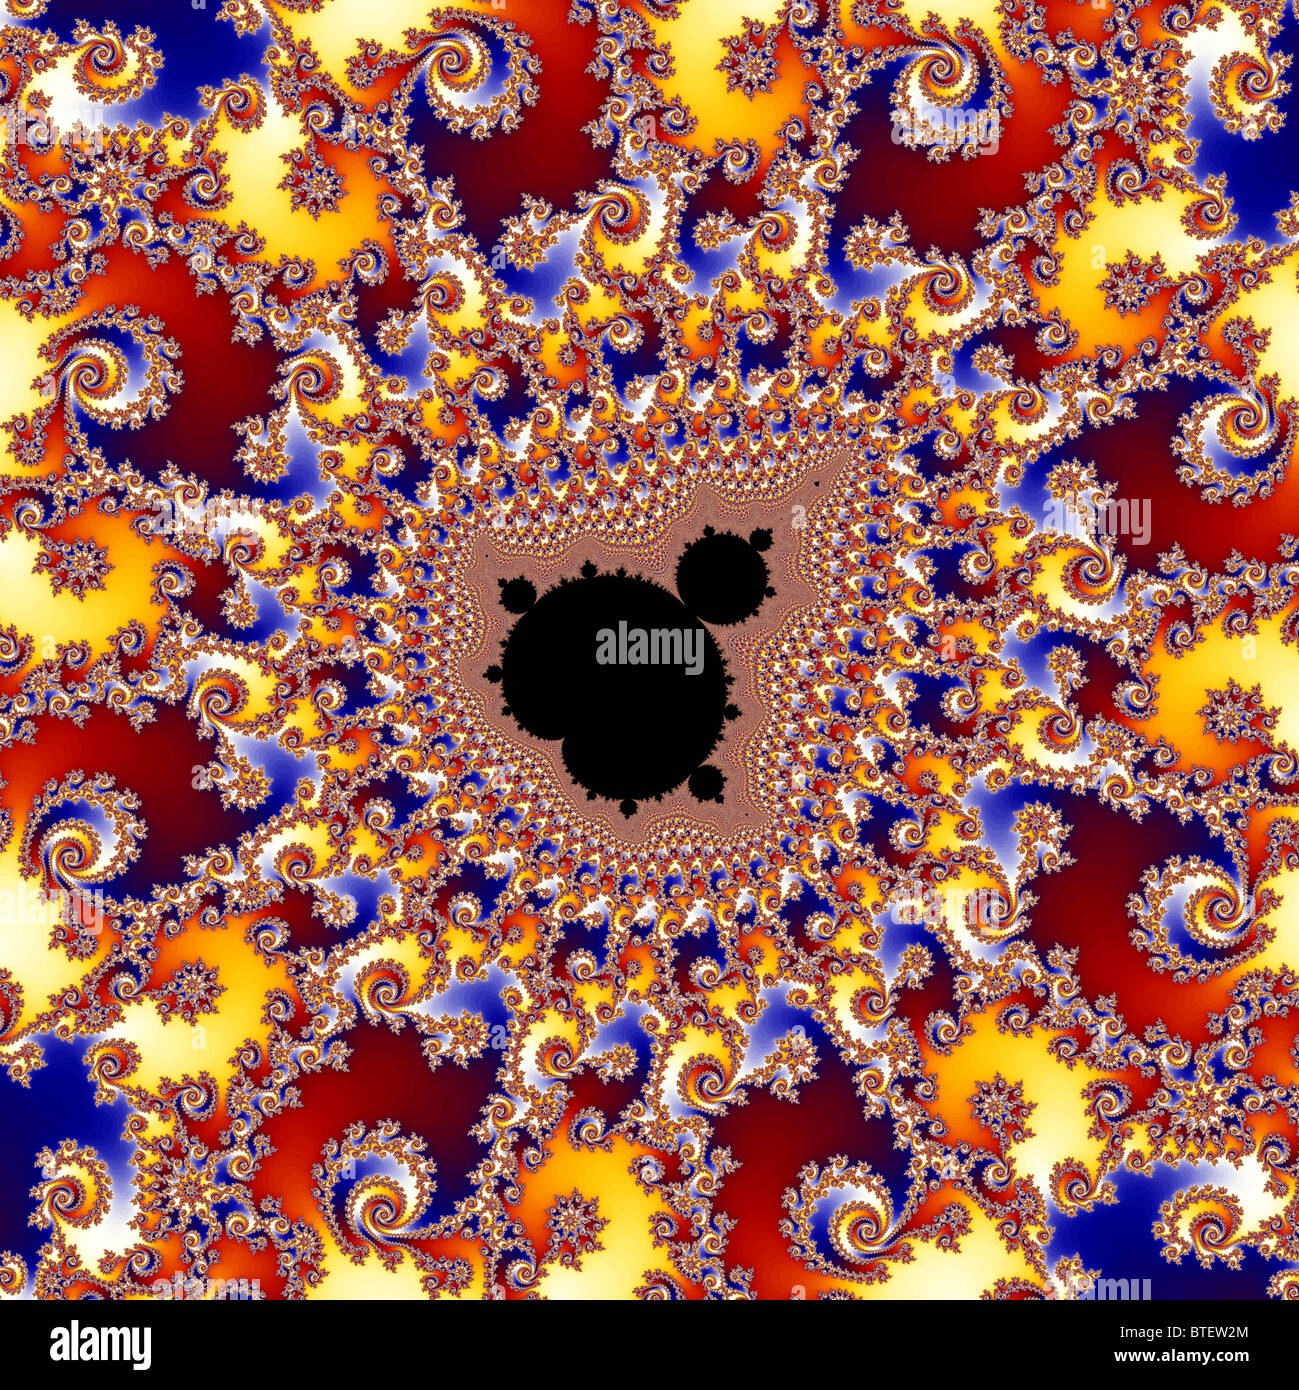 Zoom Into The Mandelbrot Set High Resolution Stock Photography and ...